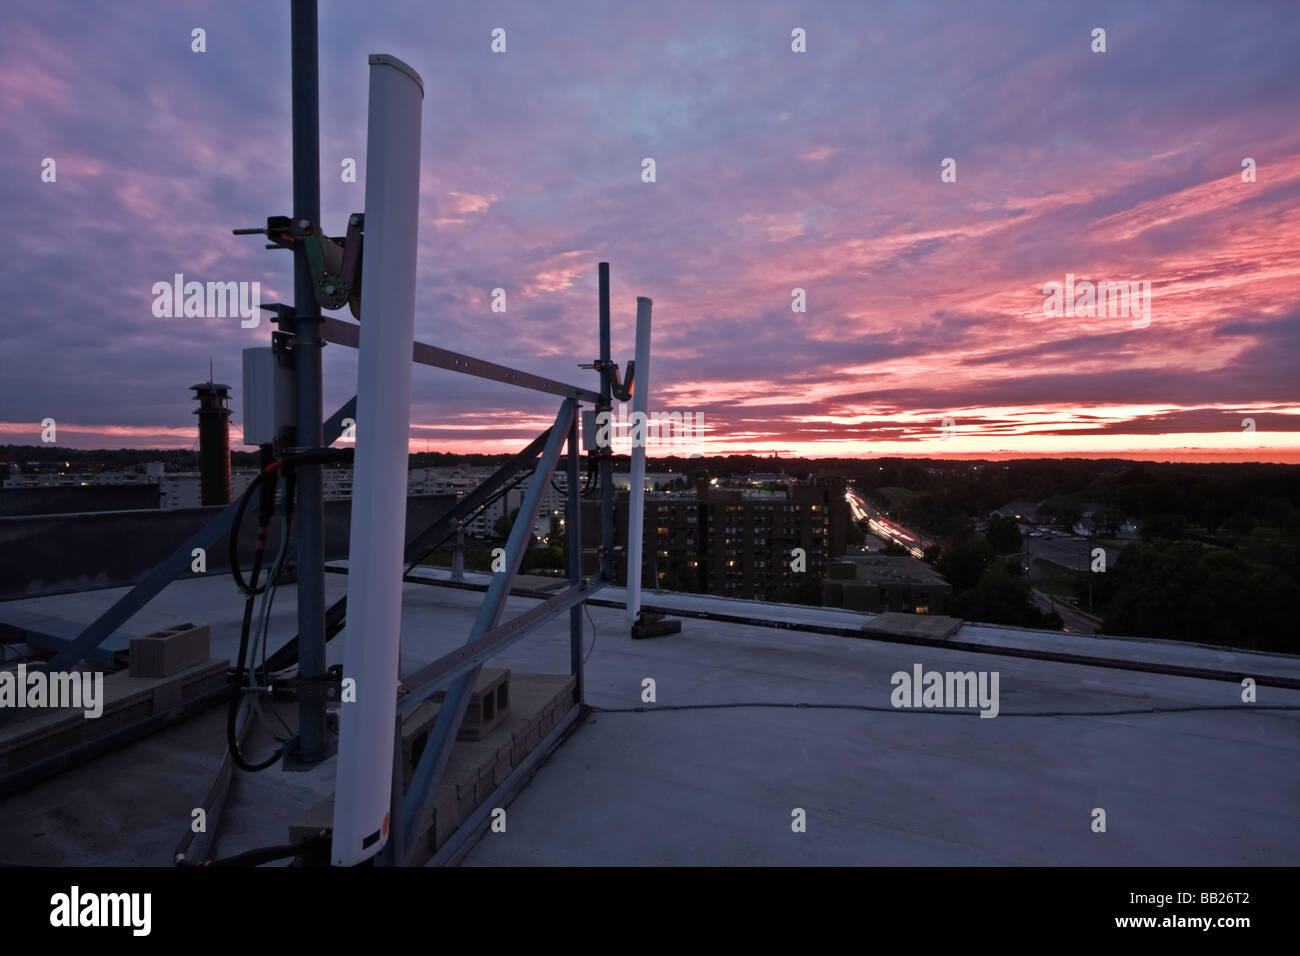 Cellular antennas installed on the rooftop seen during sunset Stock Photo